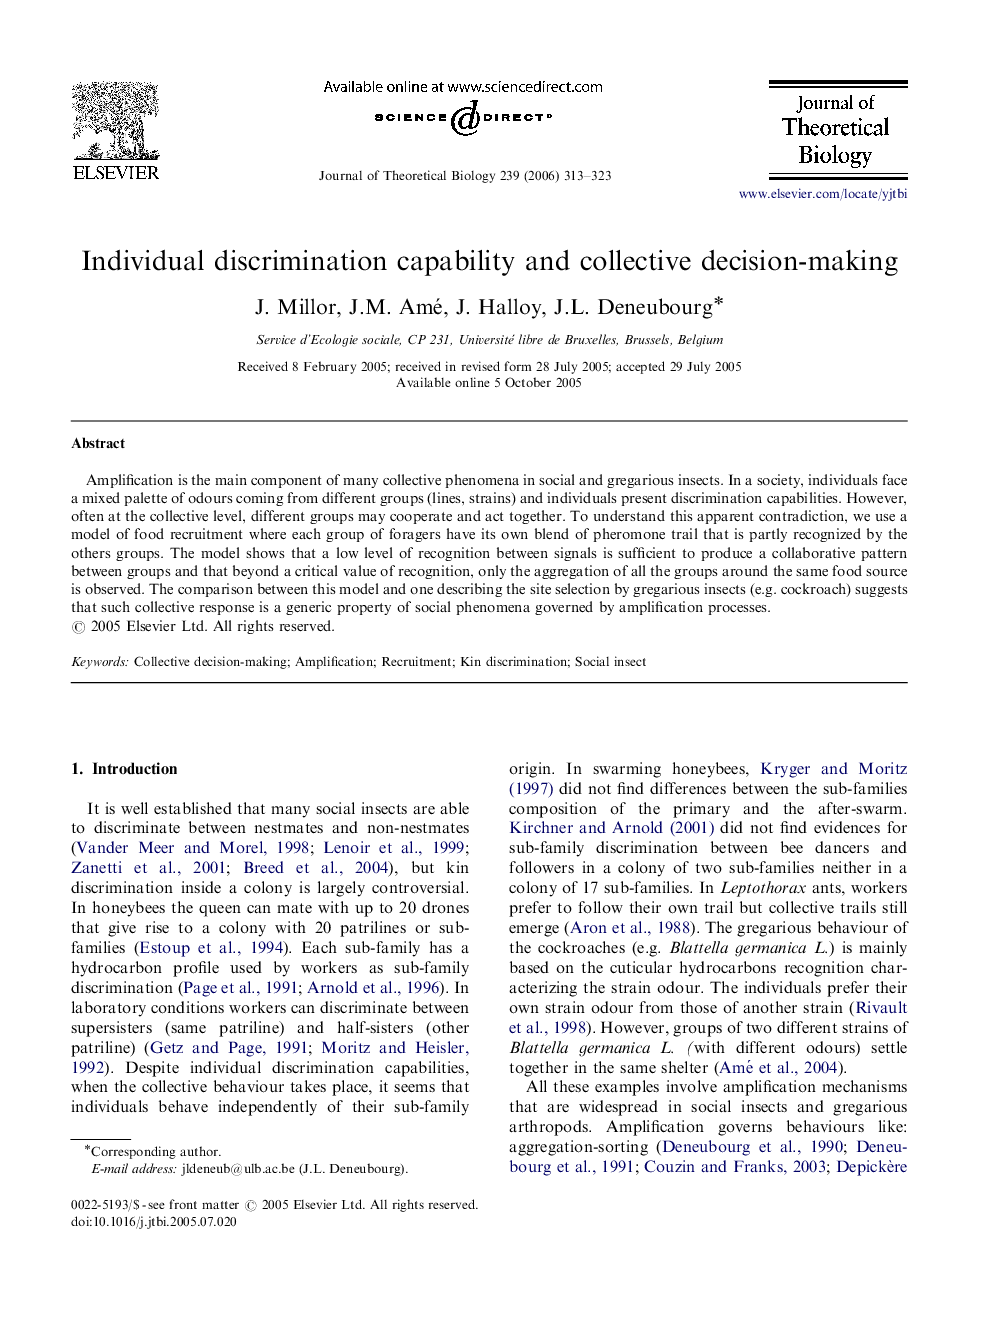 Individual discrimination capability and collective decision-making